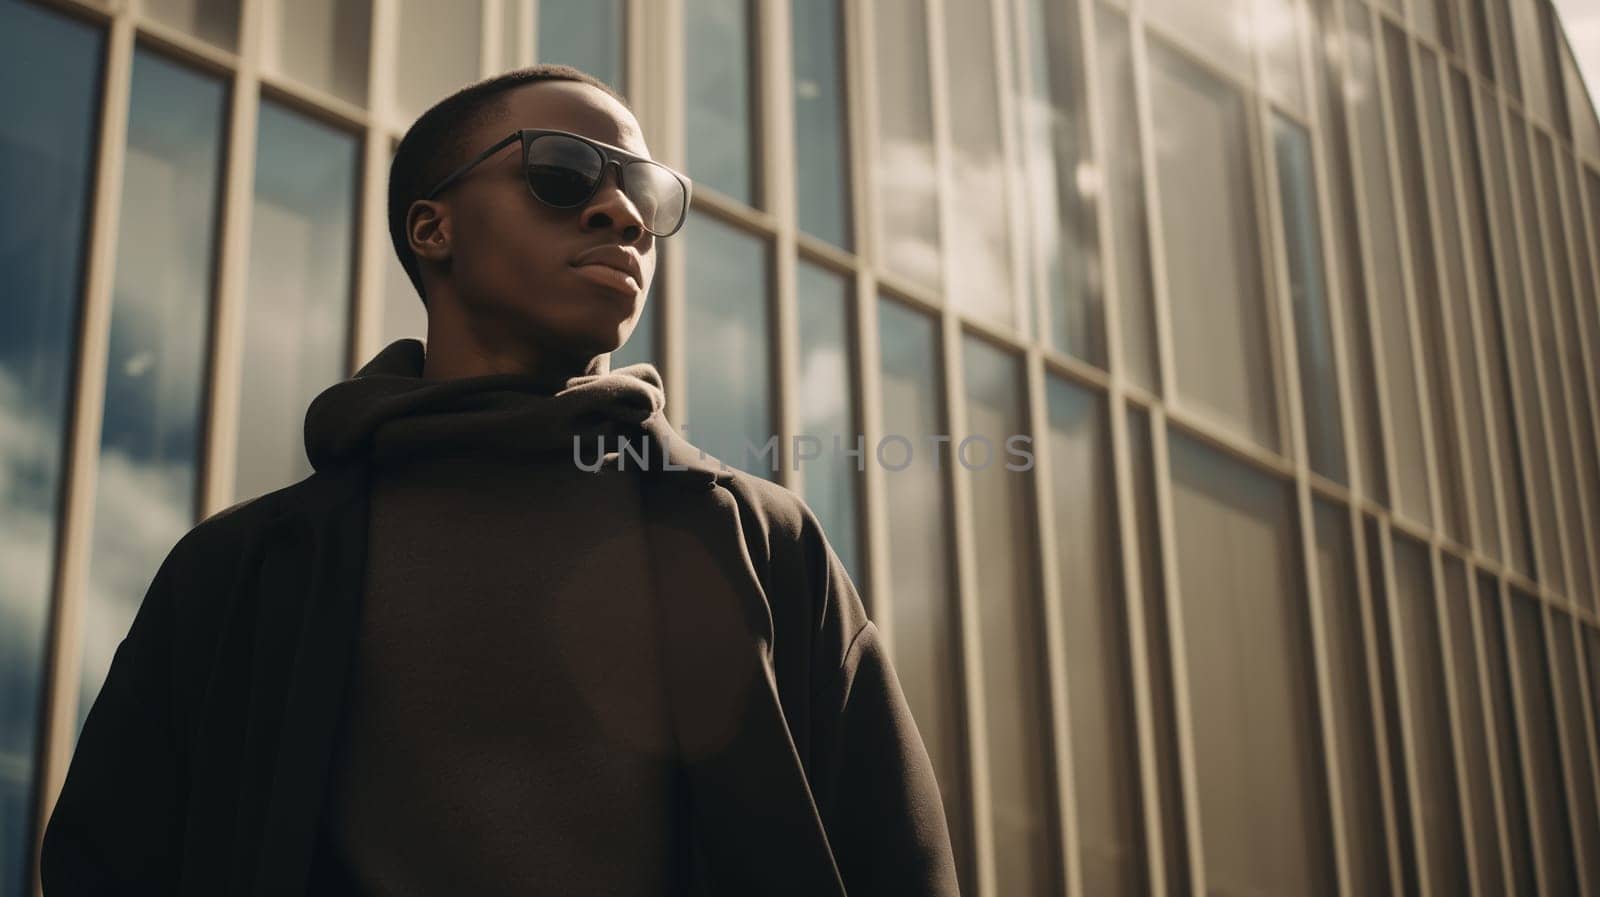 Fashionable portrait of stylish black American young man wearing trendy clothes posing on city street and looking away